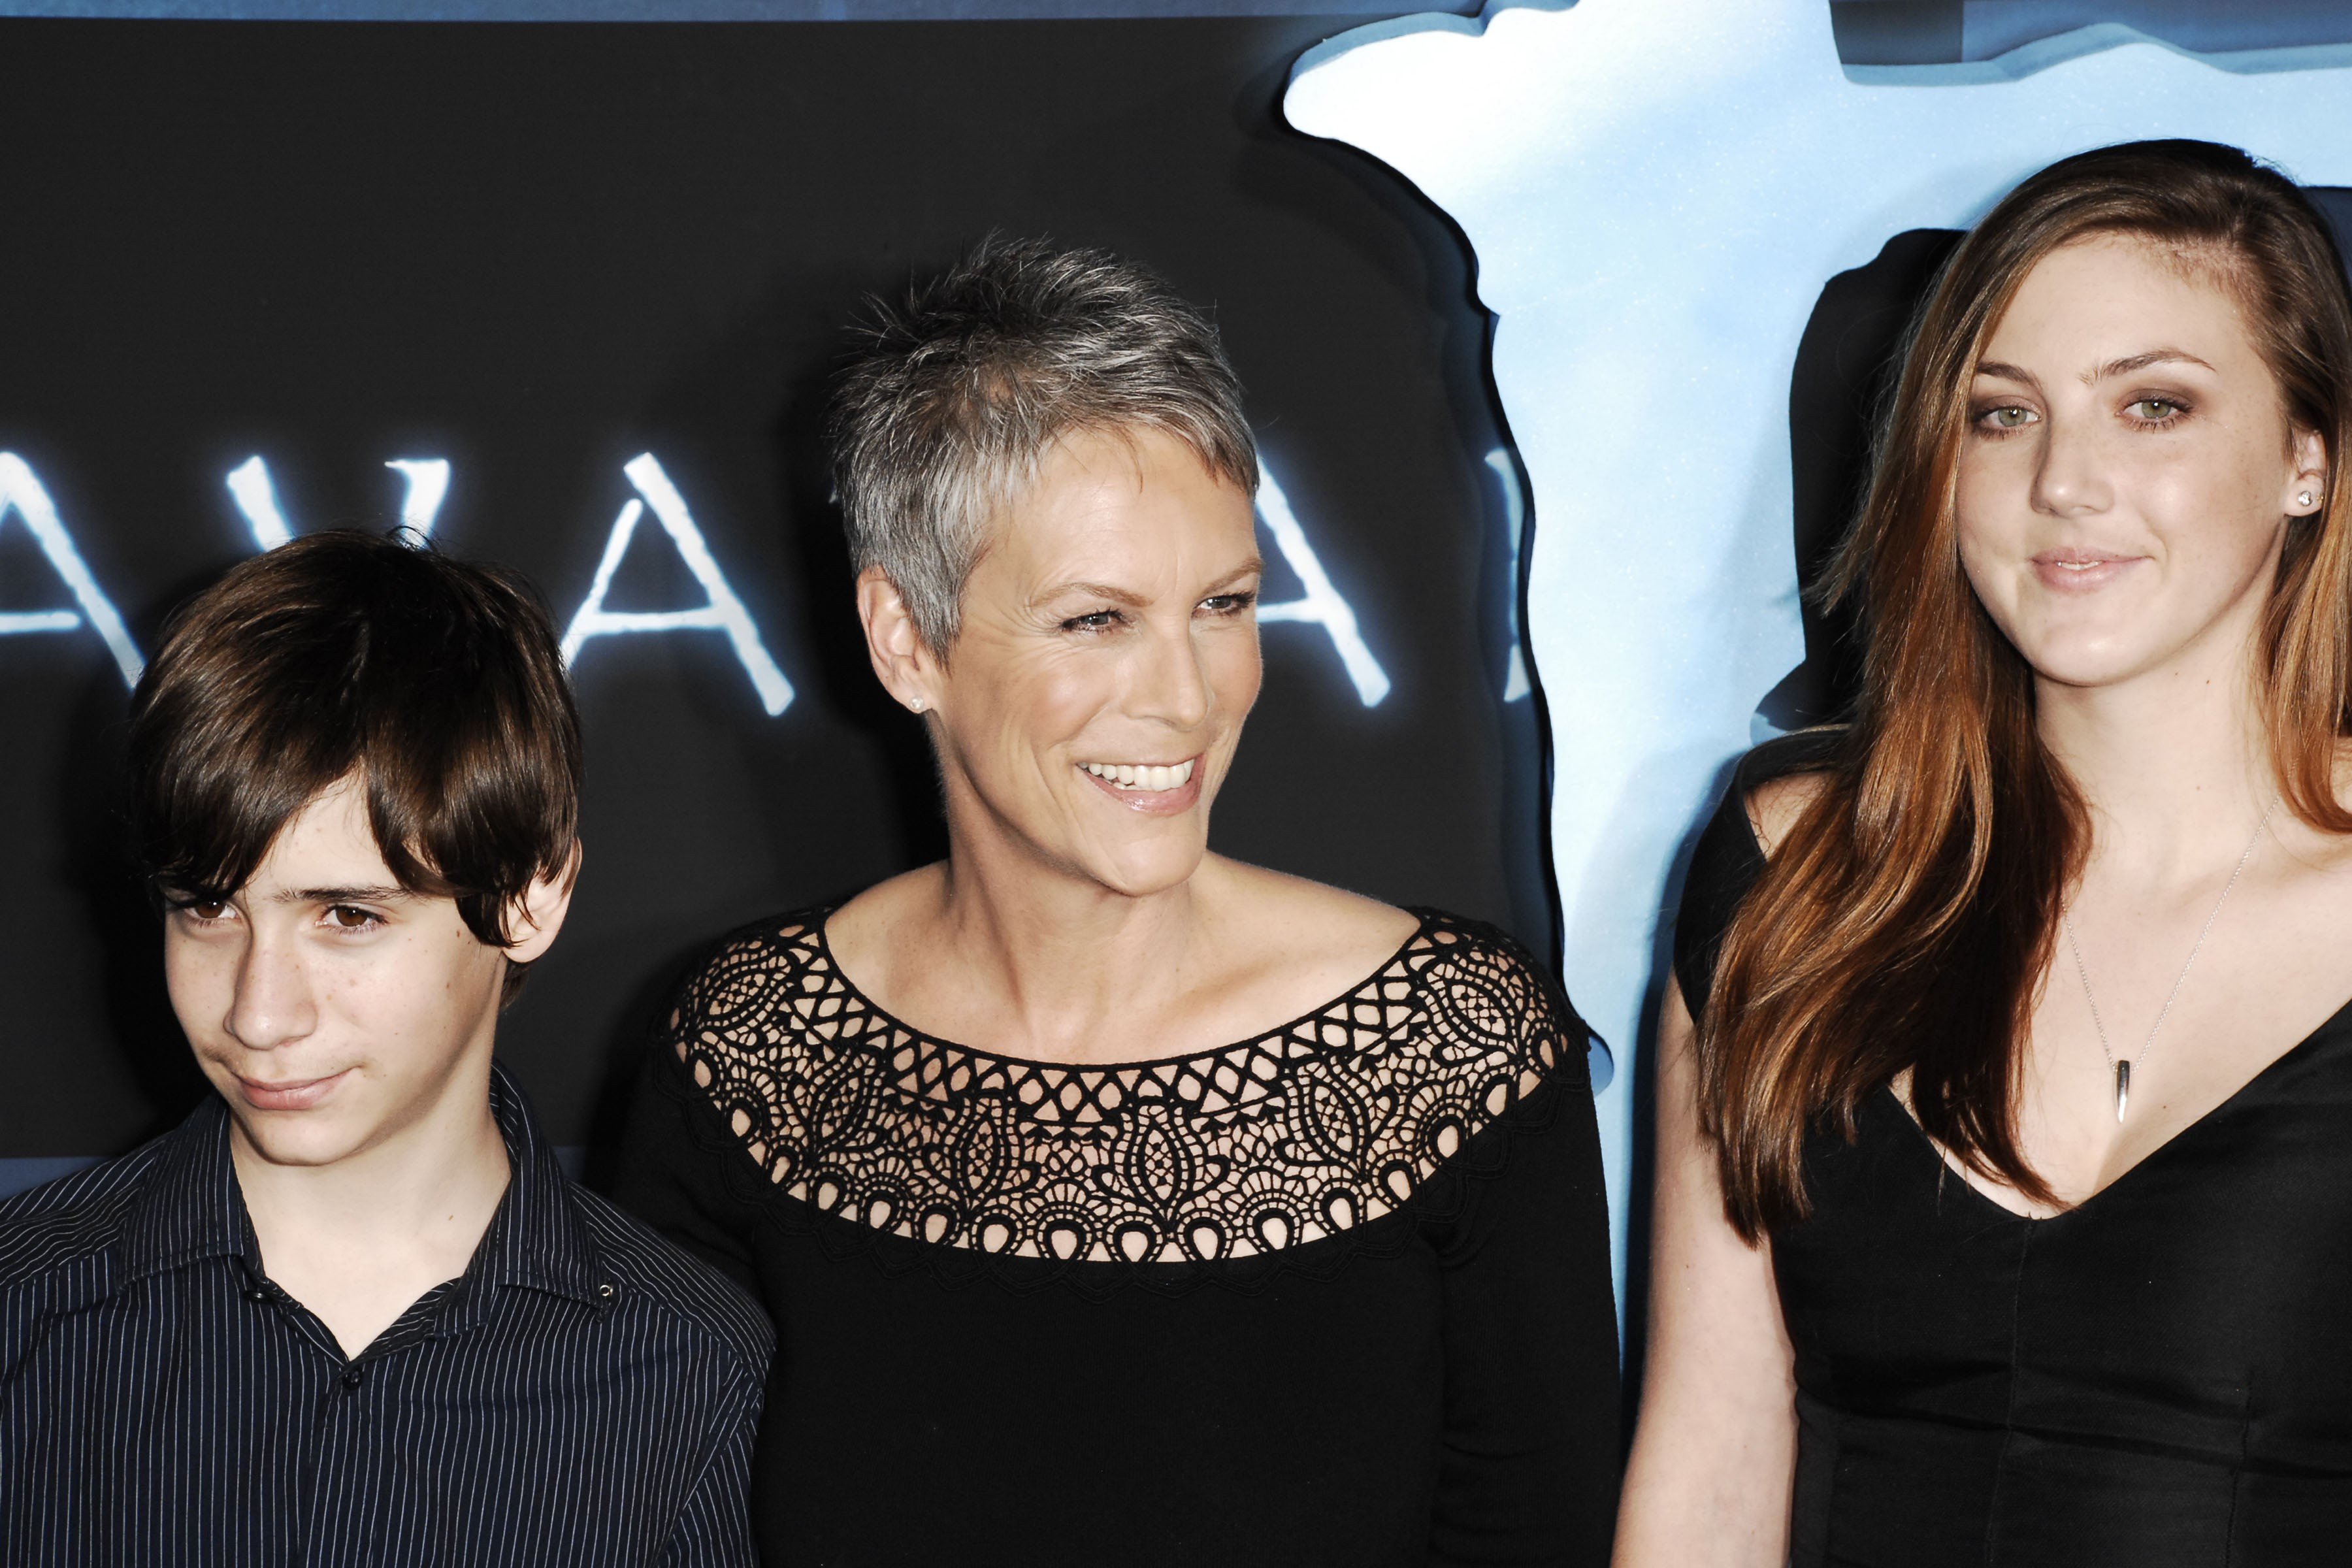 Thomas Guest, Jamie Lee Curtis, and Annie Guest at the Los Angeles premiere of "AVATAR" on December 16, 2009, in Hollywood, California | Source: Getty Images